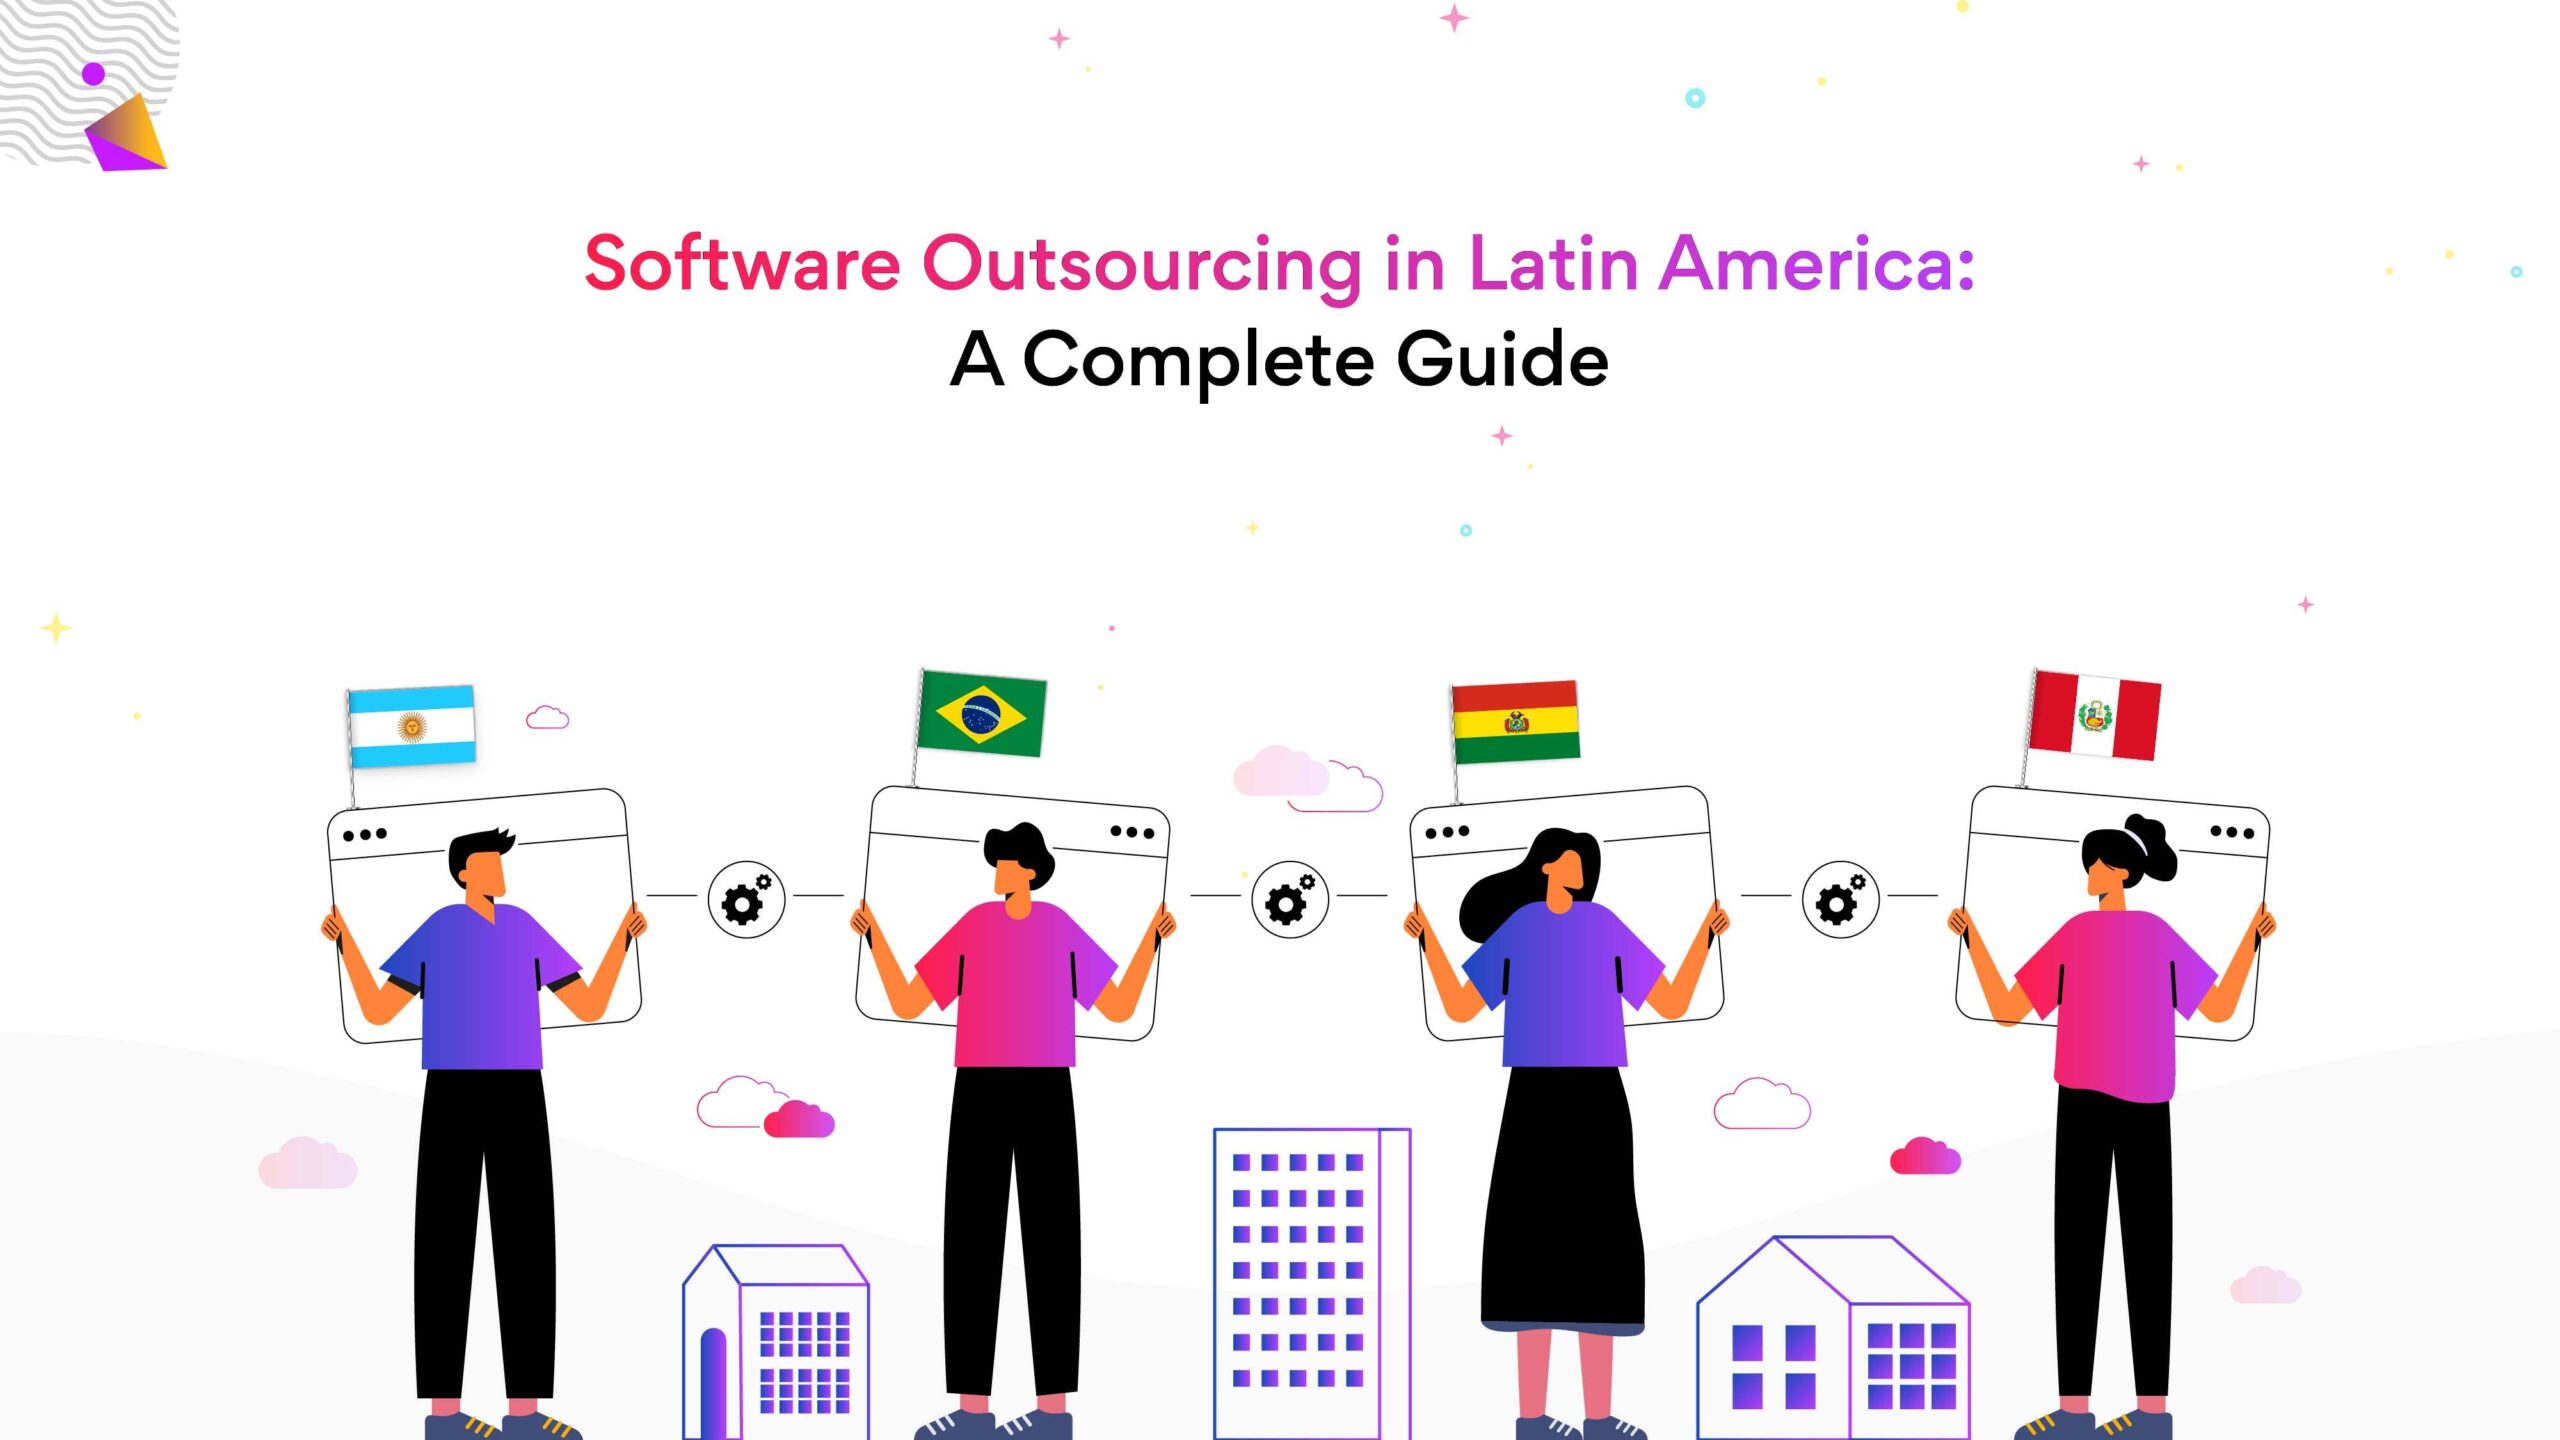 Software outsourcing in Latin America